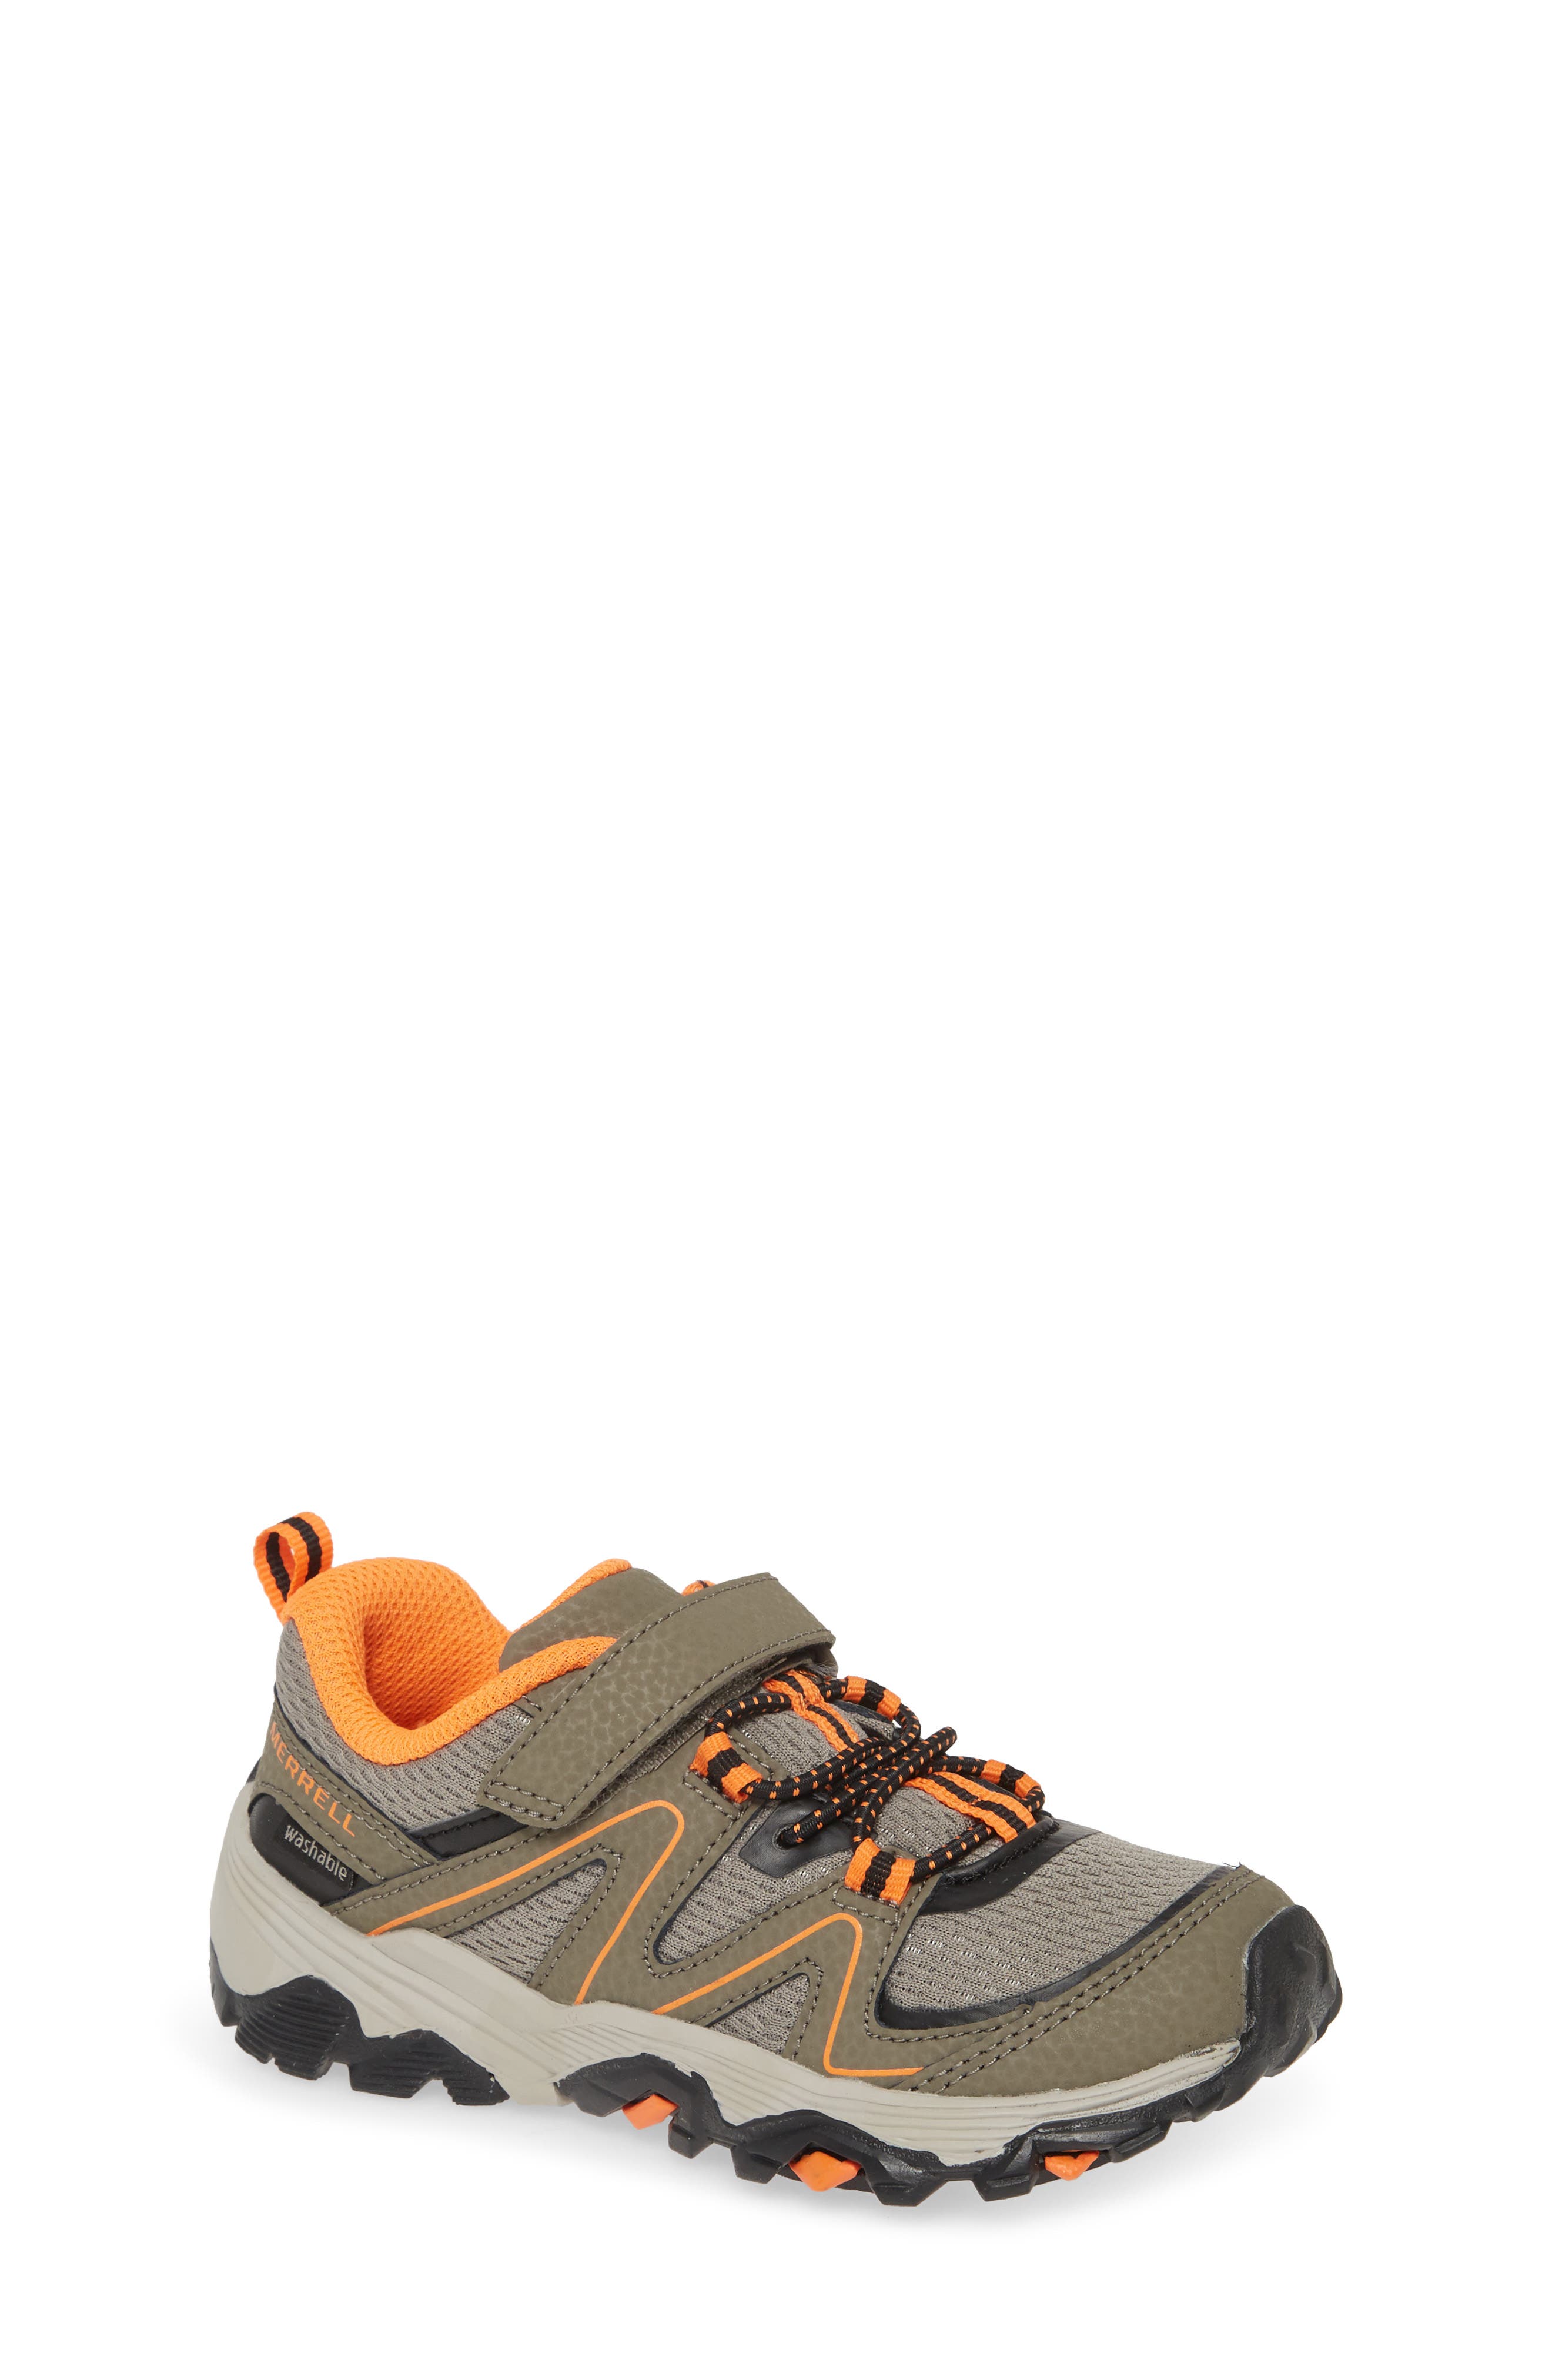 baby merrell shoes